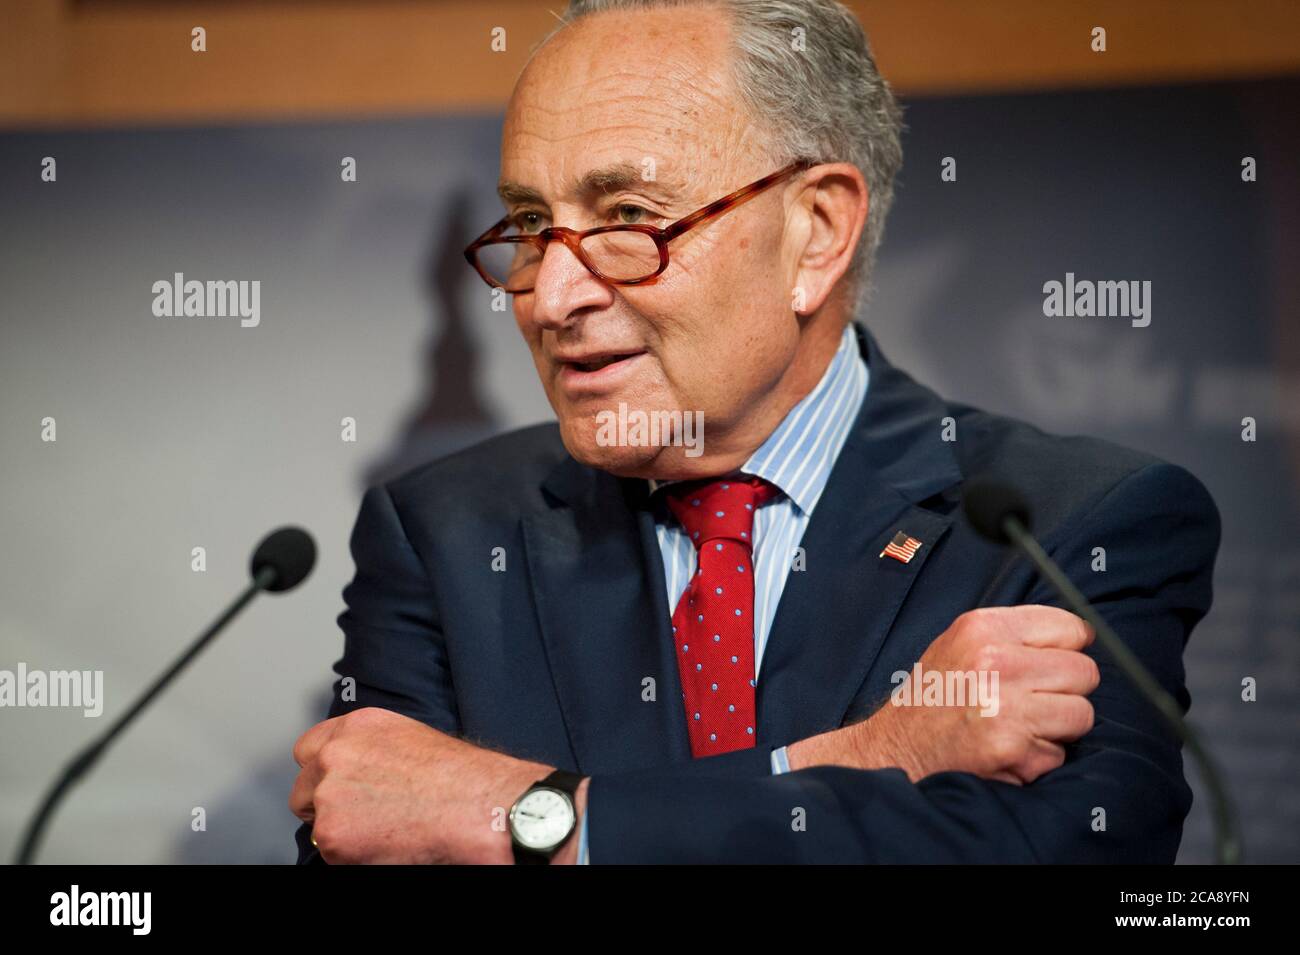 United States Senate Minority Leader Chuck Schumer (Democrat of New York), offers remarks regarding the ongoing negotiations with the COVID-19 economic stimulus package, during a press conference at the US Capitol in Washington, DC., Tuesday, August 4, 2020. Credit: Rod Lamkey/CNP /MediaPunch Stock Photo